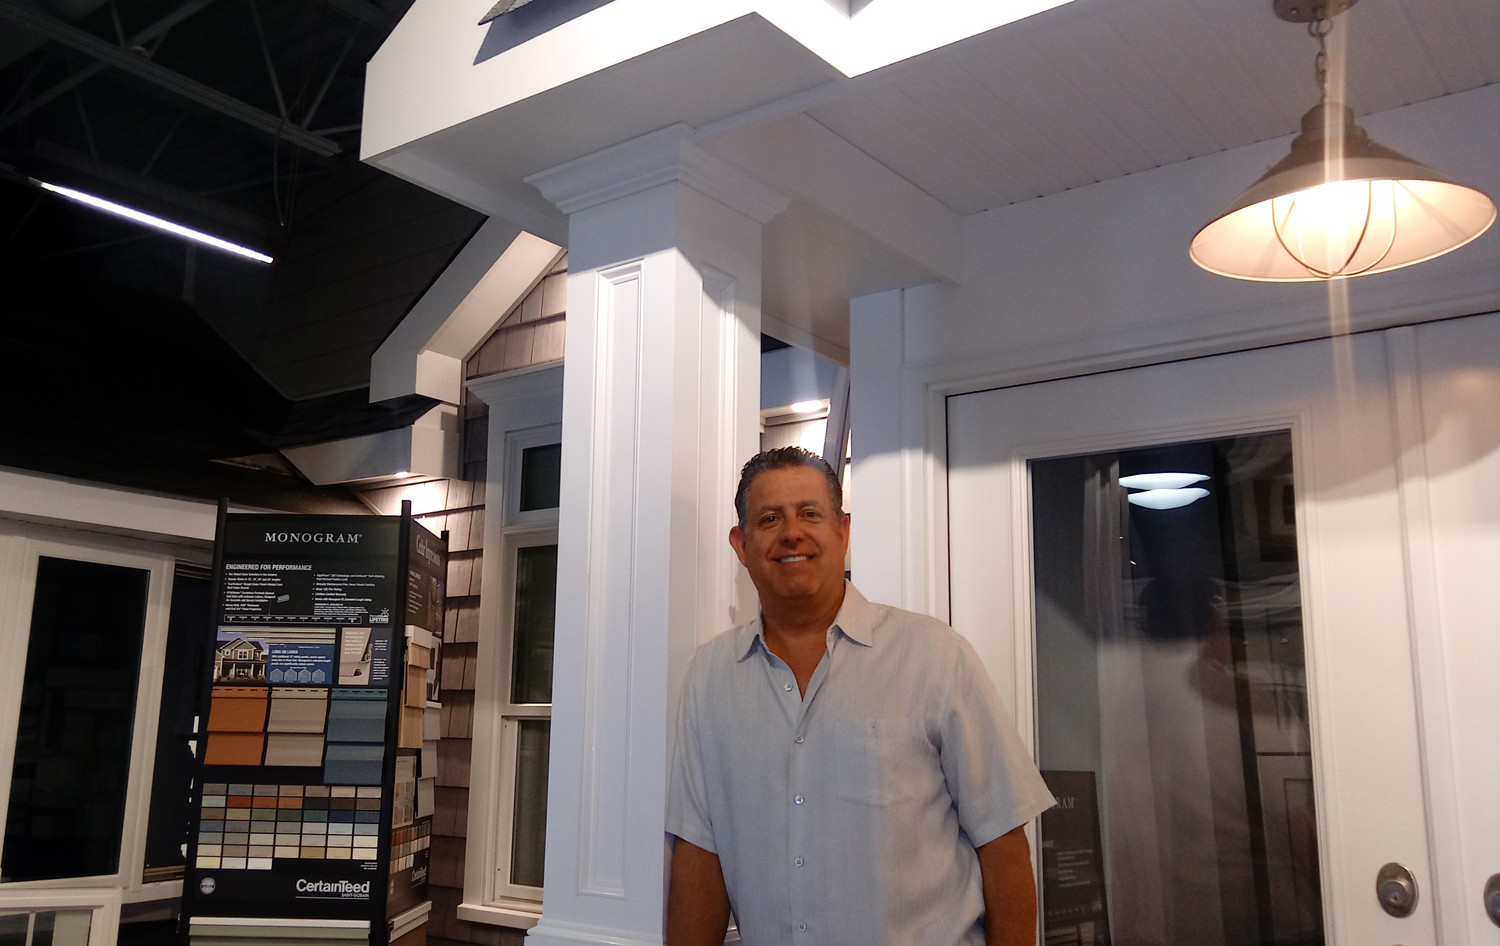 Sal Ferro, president and CEO of Alure Home Improvements, is especially proud of Alure’s showroom, which opened in 1991.